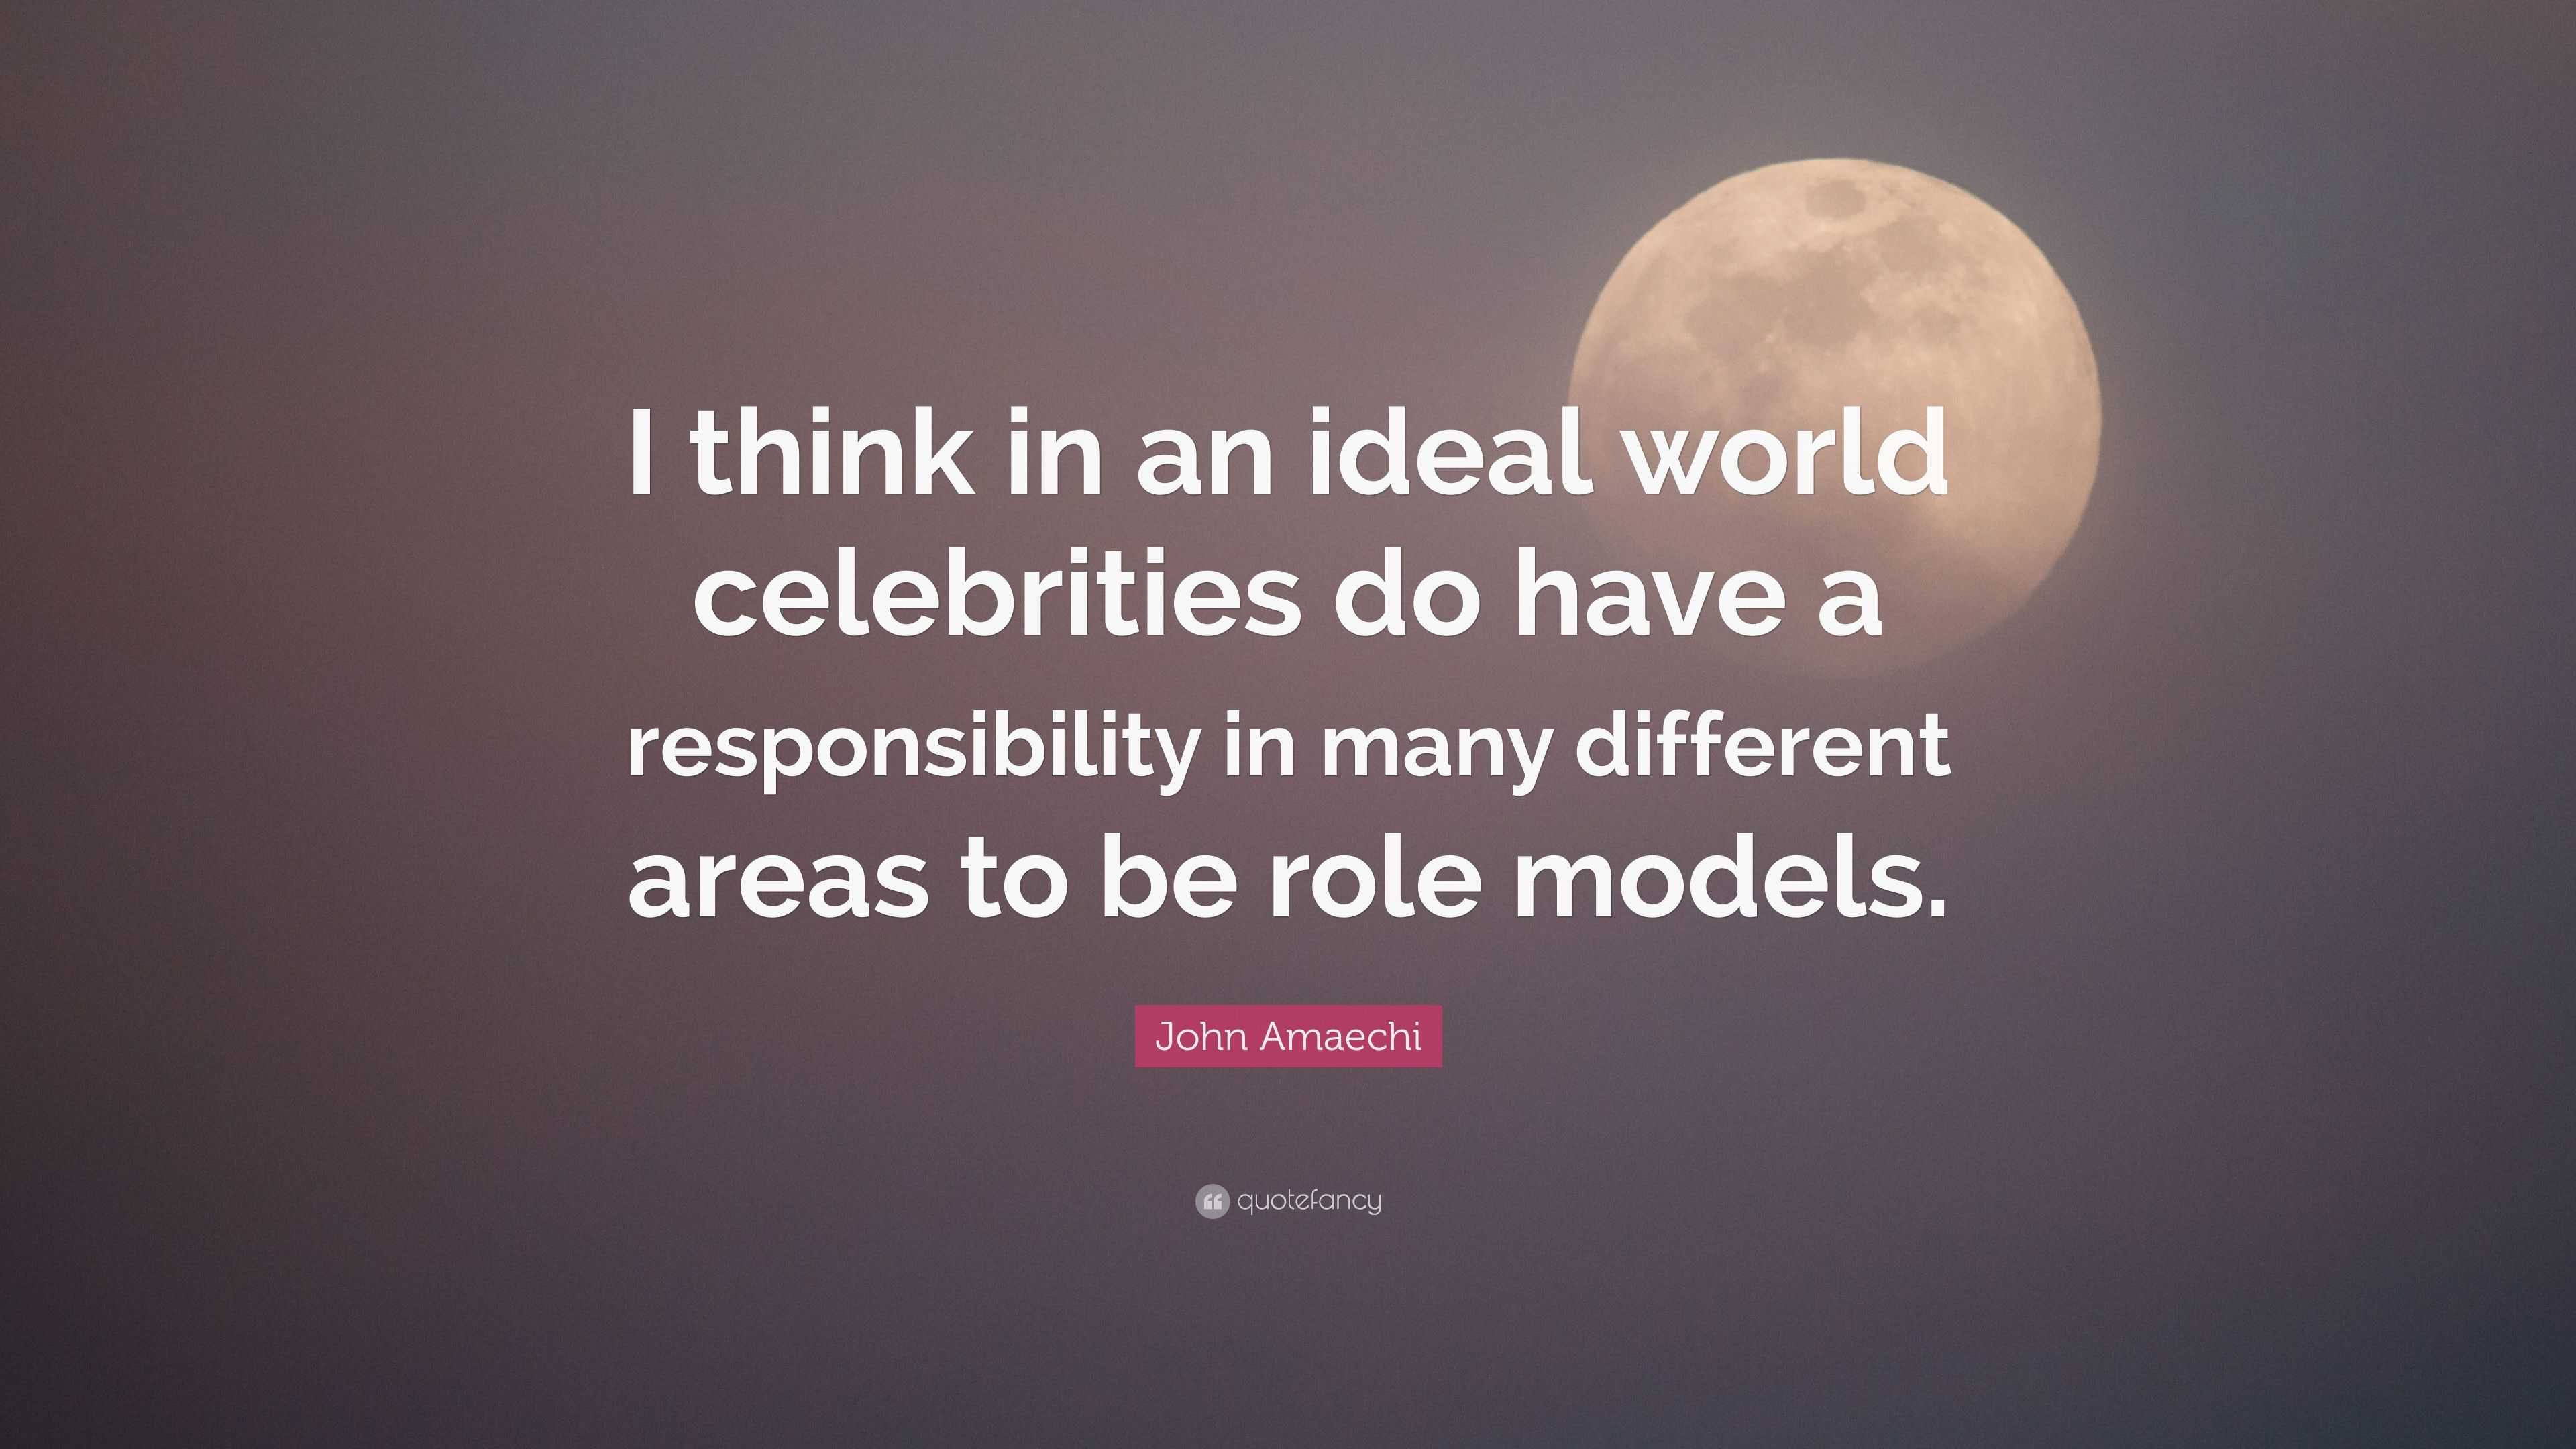 John Amaechi Quote: “I think in an ideal world celebrities do have a ...